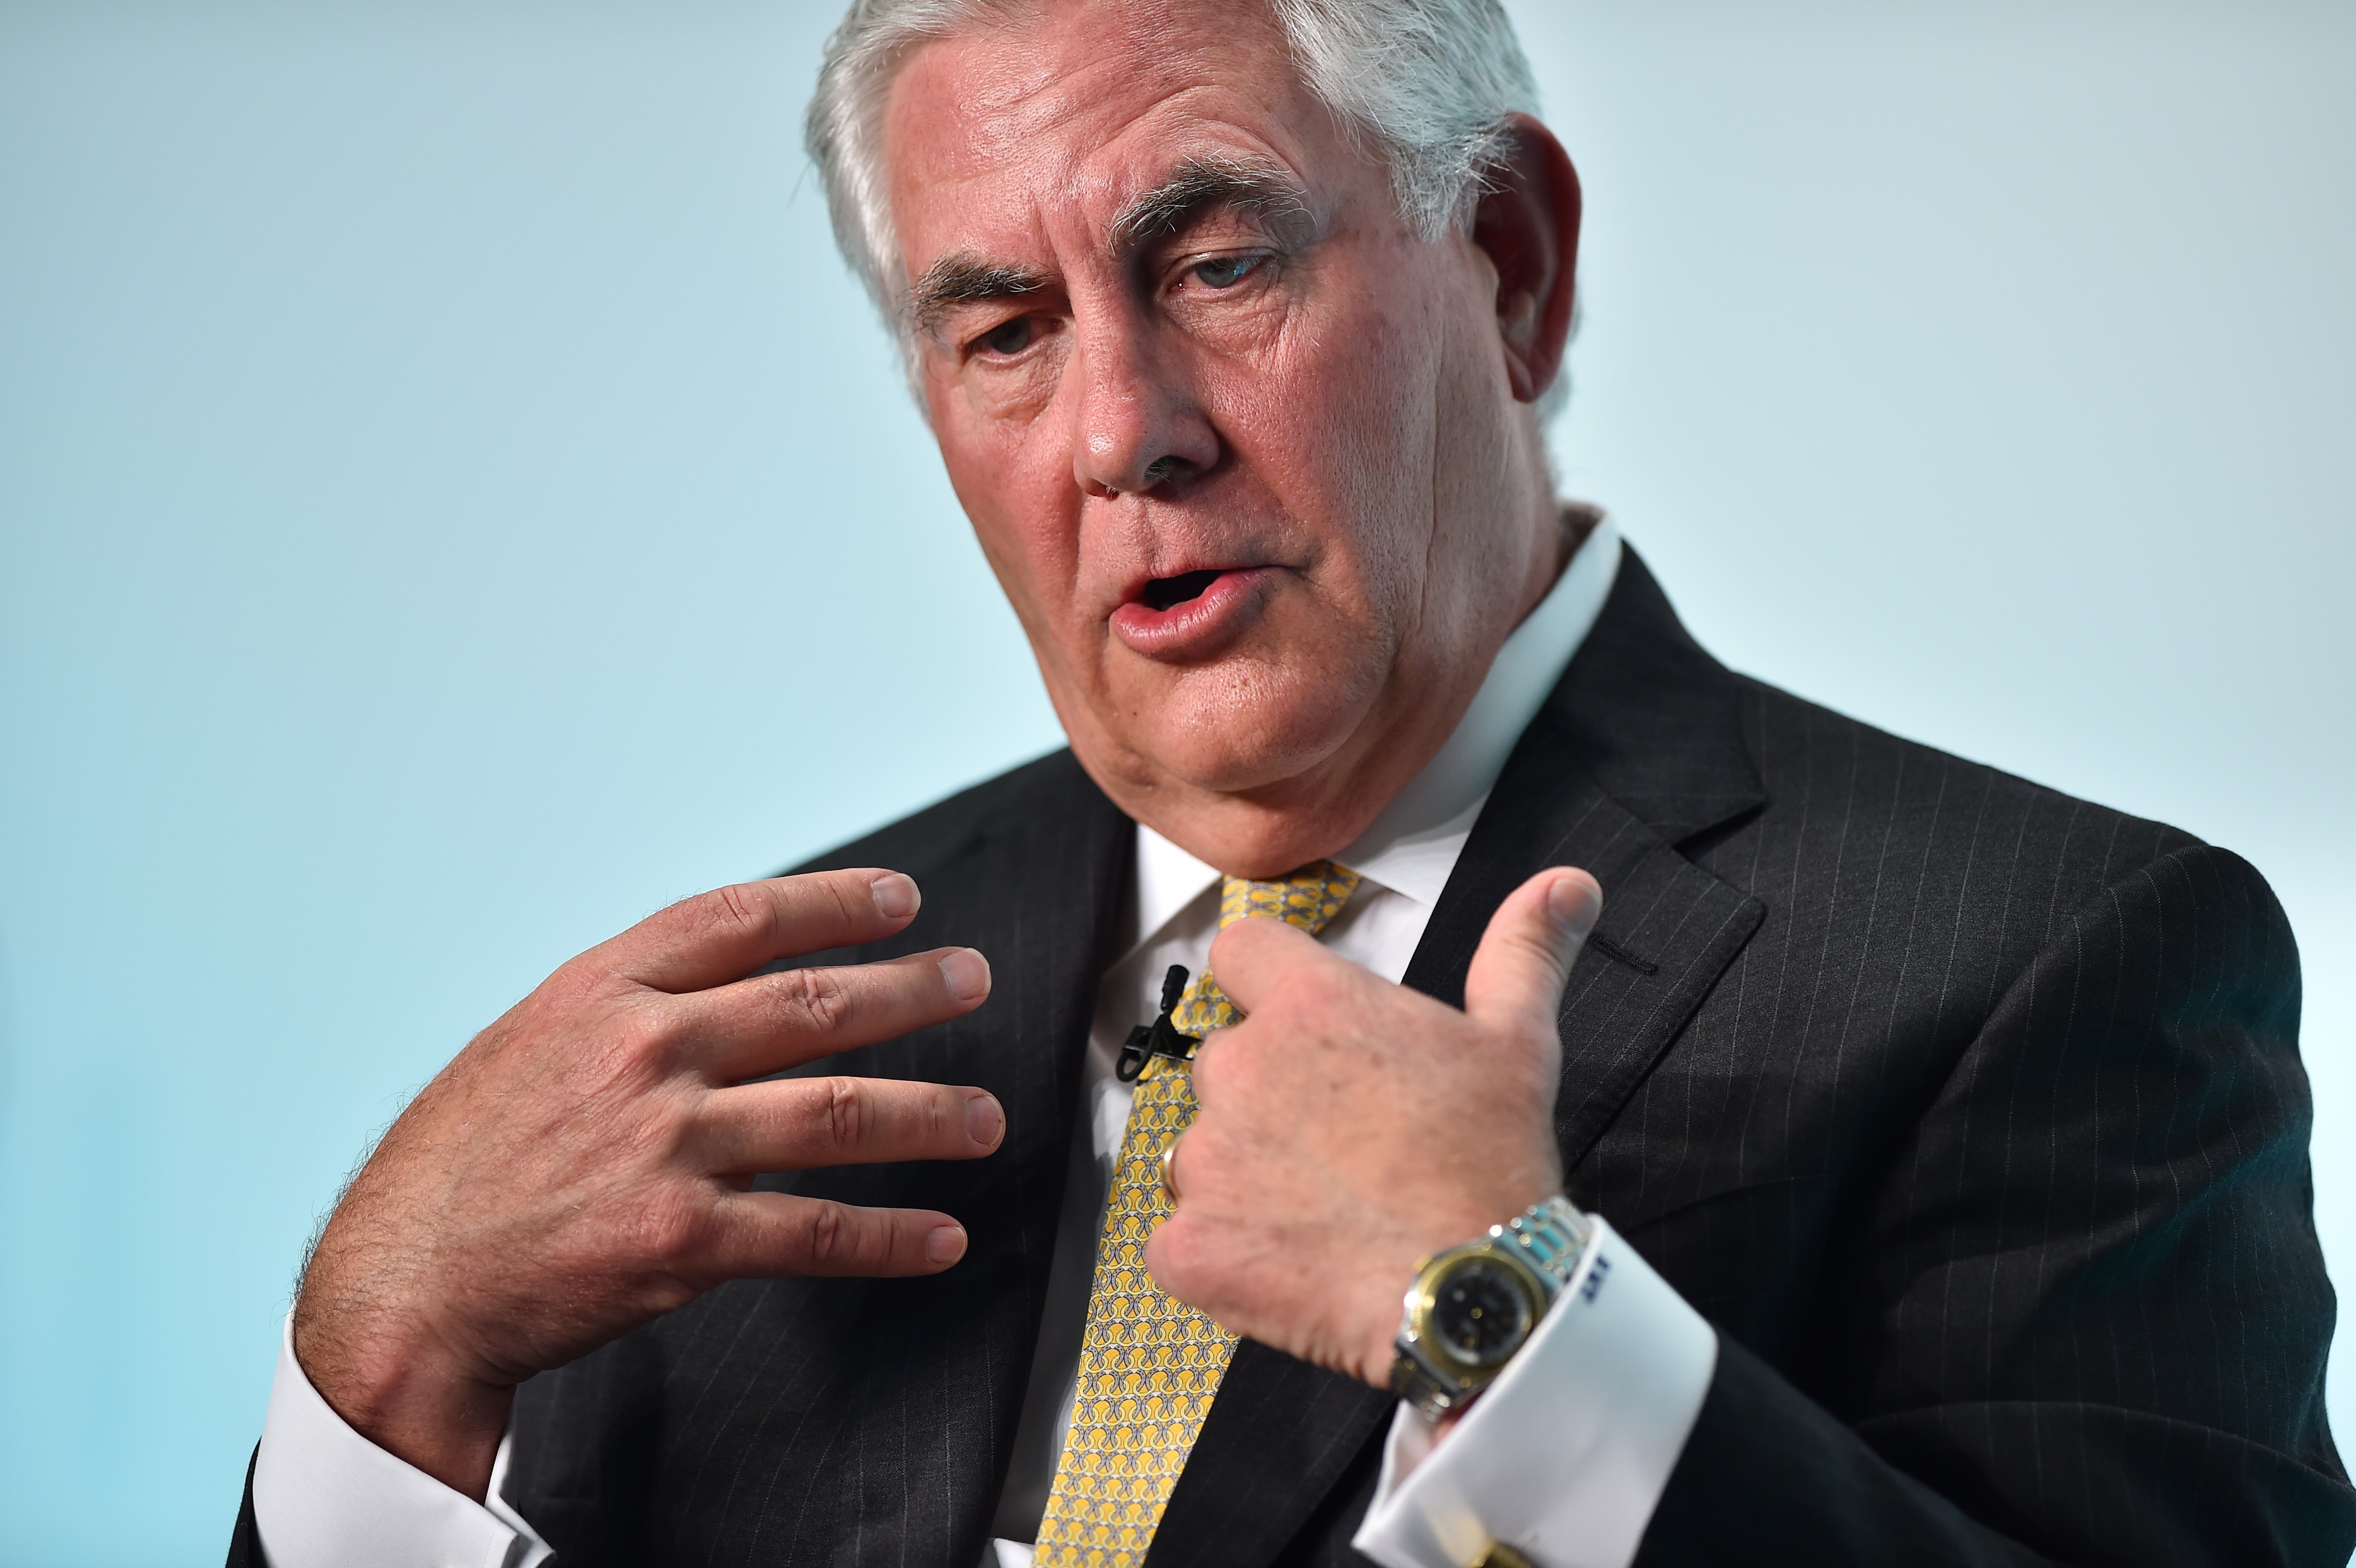 Rex Tillerson speaks during the 2015 Oil and Money conference in central London on October 7, 2015 (Getty Images)